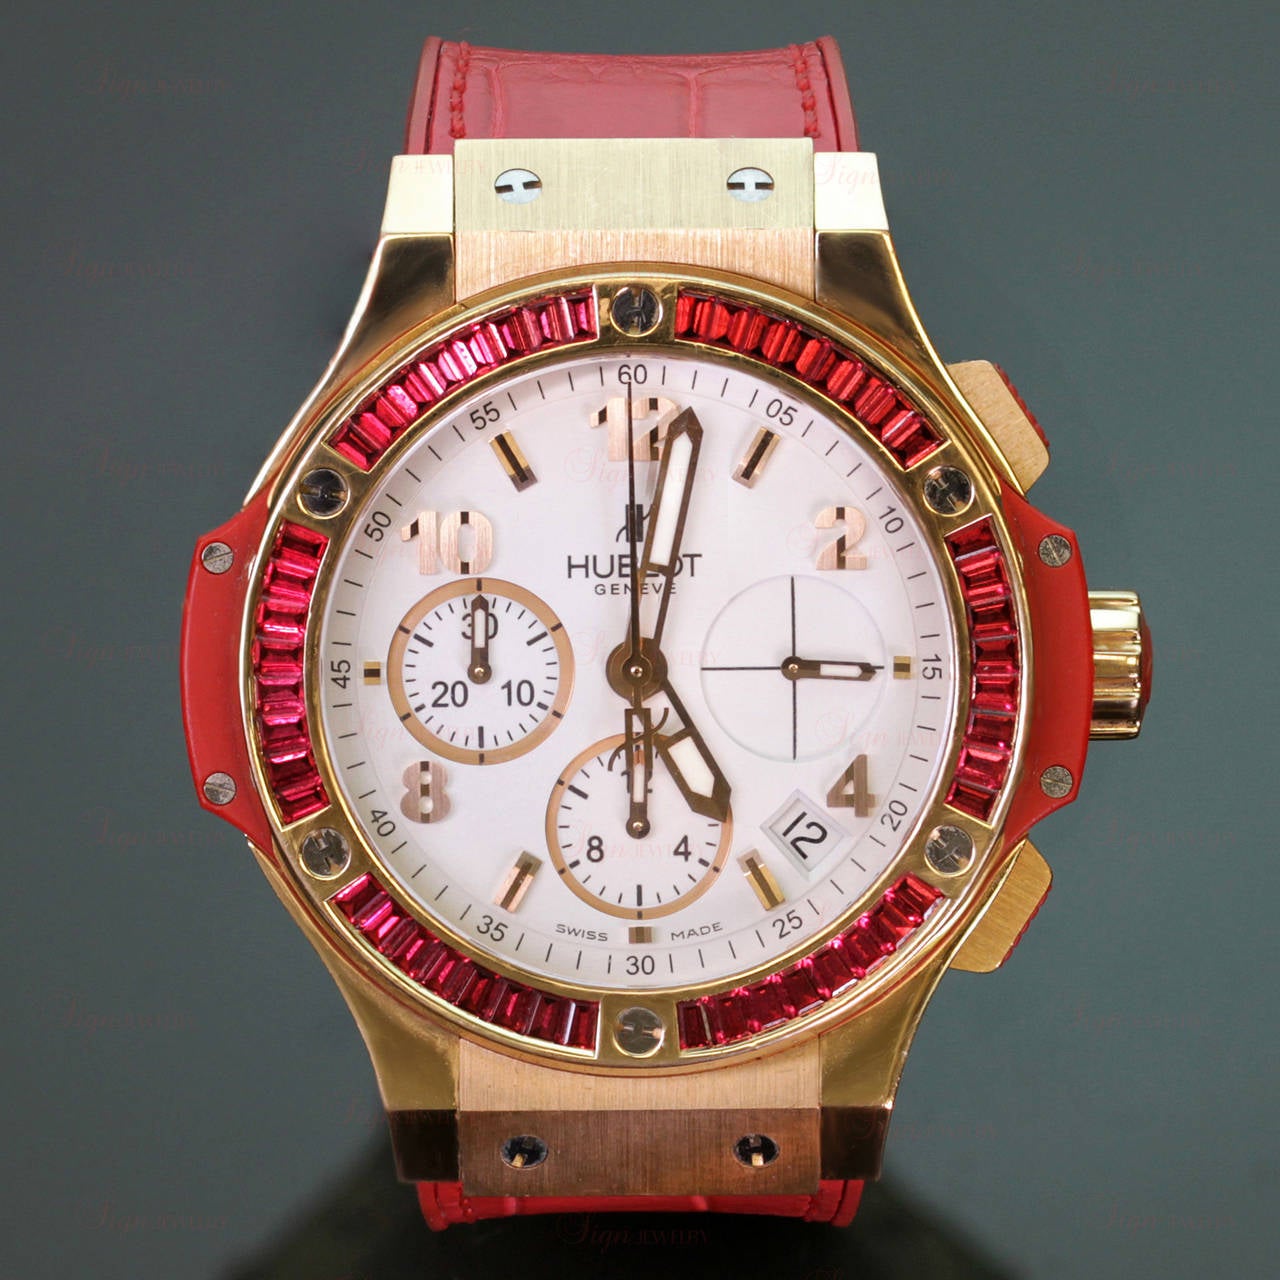 This fabulous 38mm Hublot's Big Bang Tutti Frutti HUB 2900 wristwatch features an 18k yellow gold circular bezel with 48 channel-set baguette-cut red spinels, a tonneau case with red lateral composite resin inserts, a white dial with applied Arabic